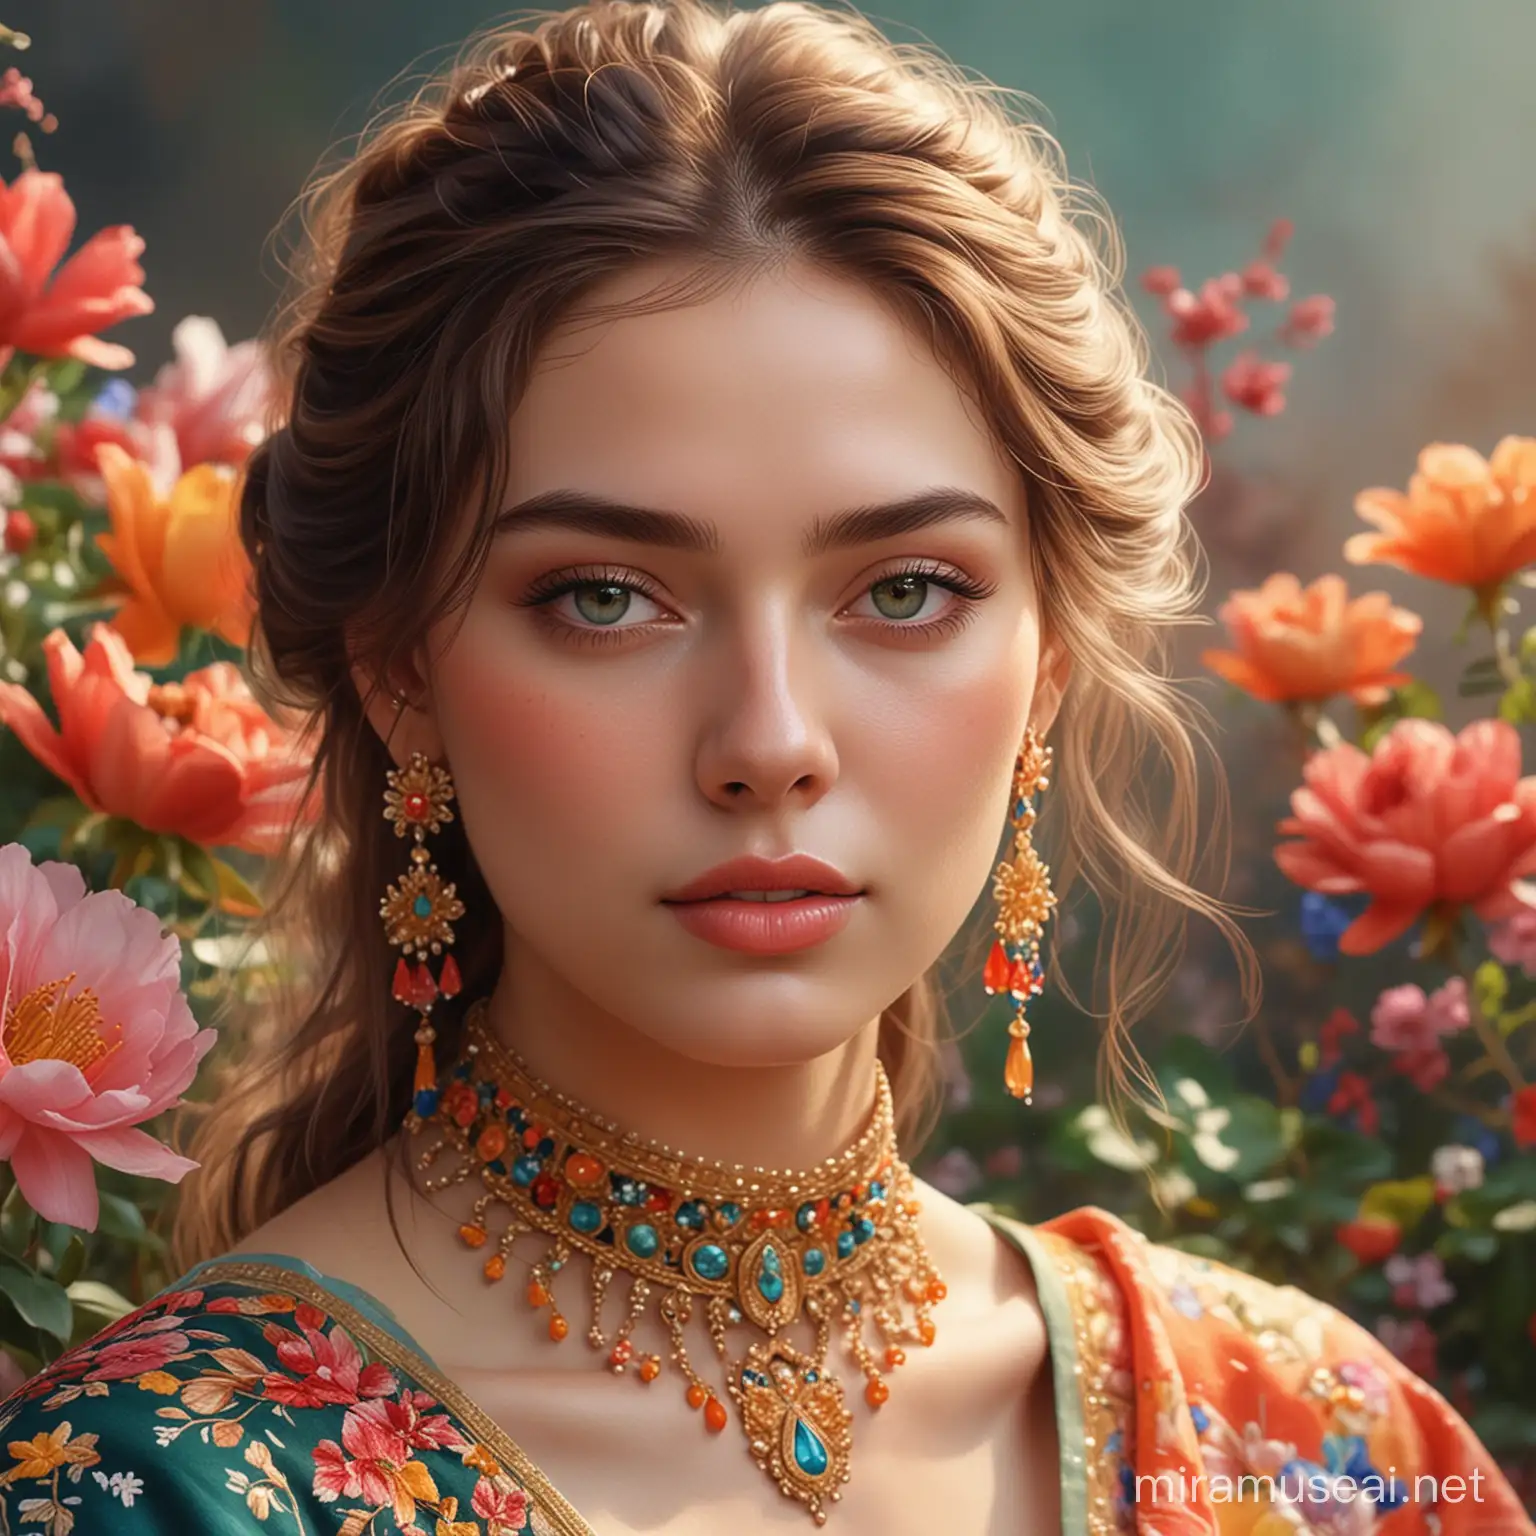 A digital painting of a woman with a serene and gentle expression. Her complexion is fair with a soft glow, and her hair is neatly styled, showing a hint of elegant earrings and a floral accessory. The portrait is adorned with a vibrant explosion of watercolor splashes and floral elements that surround her, blending seamlessly into her attire. Her clothing is a traditional outfit richly decorated with embroidered floral designs, blending with the watercolor effect. The colors are a mix of vivid and pastel hues, including reds, yellows, blues, and greens, creating a dynamic and ethereal atmosphere. Her lips are tinted with a subtle coral shade, and her eyes are soft and welcoming. The overall style is a fusion of realism and abstraction, emphasizing the beauty of the subject amidst a burst of colors, , 32k render, hyperrealistic, detailed.